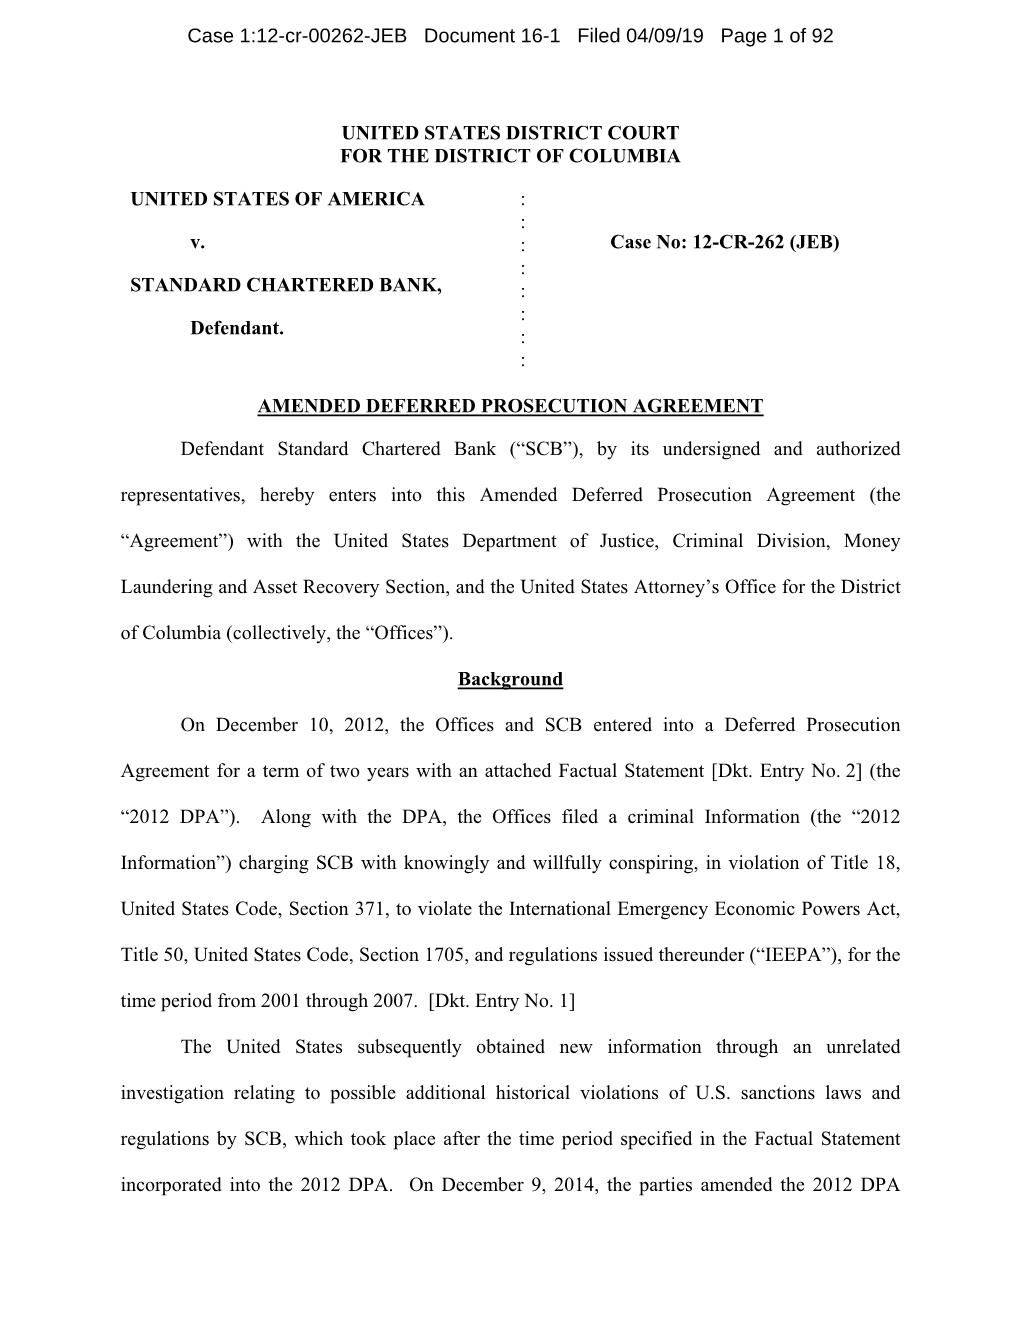 Case 1:12-Cr-00262-JEB Document 16-1 Filed 04/09/19 Page 1 of 92